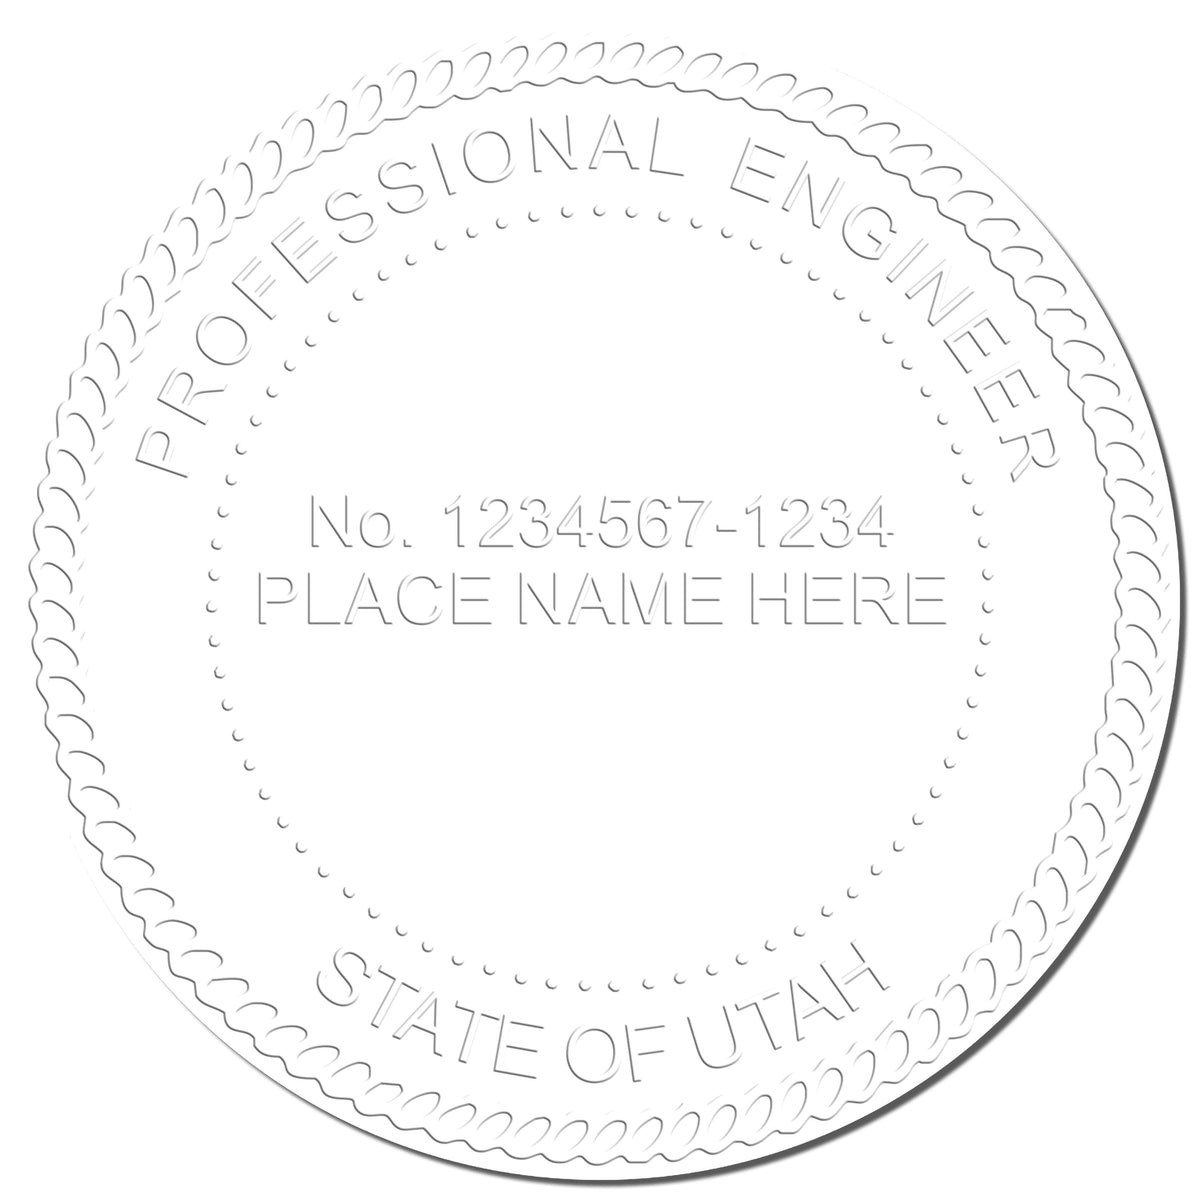 This paper is stamped with a sample imprint of the Gift Utah Engineer Seal, signifying its quality and reliability.